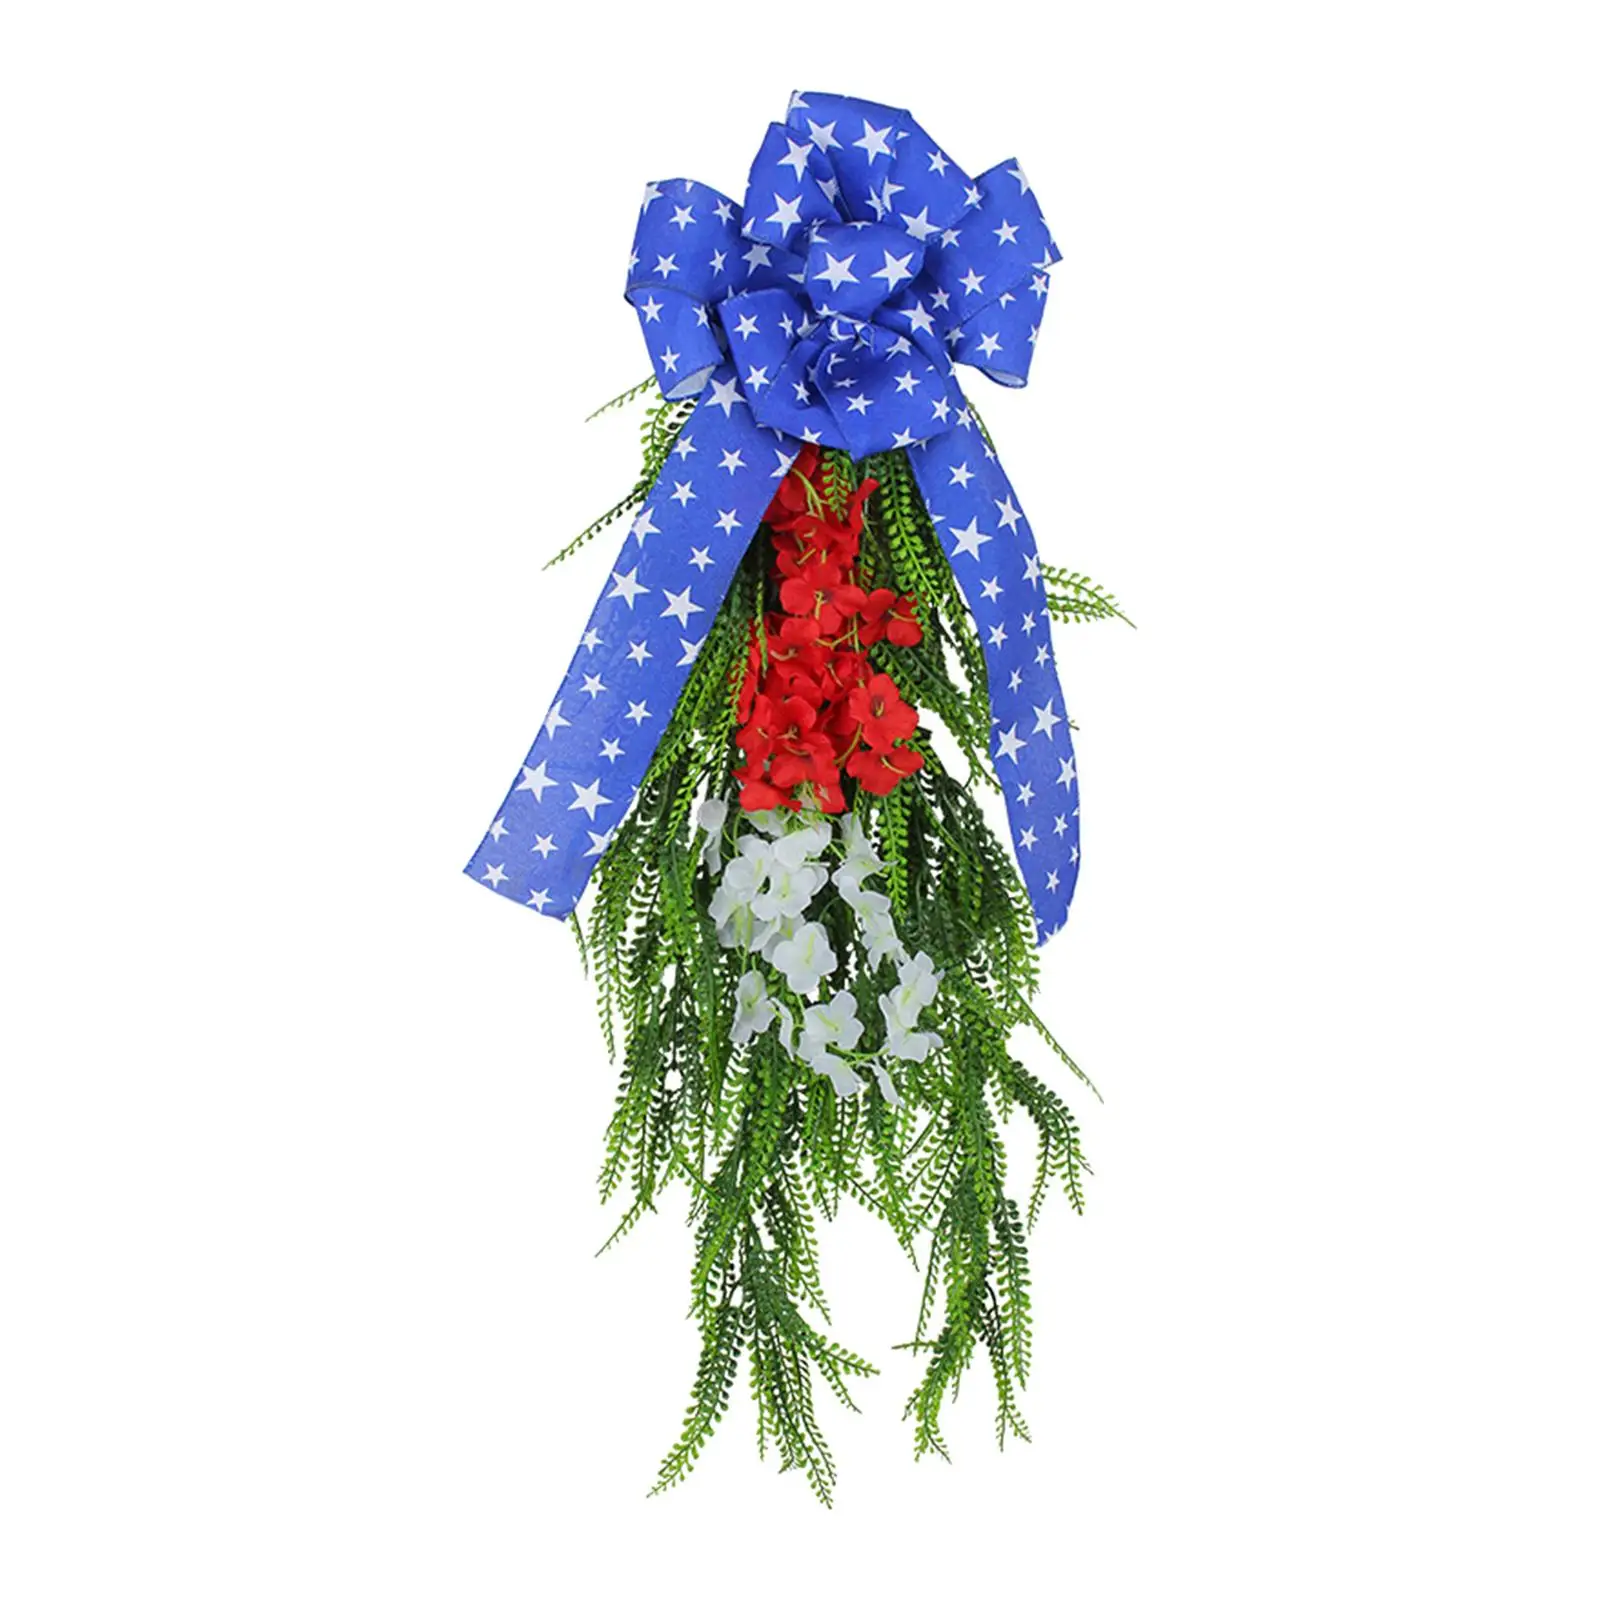 Patriotic Wreaths Wall Decoration Floral Garland Artificial Hanging Wreath for Indoor Outdoor Home